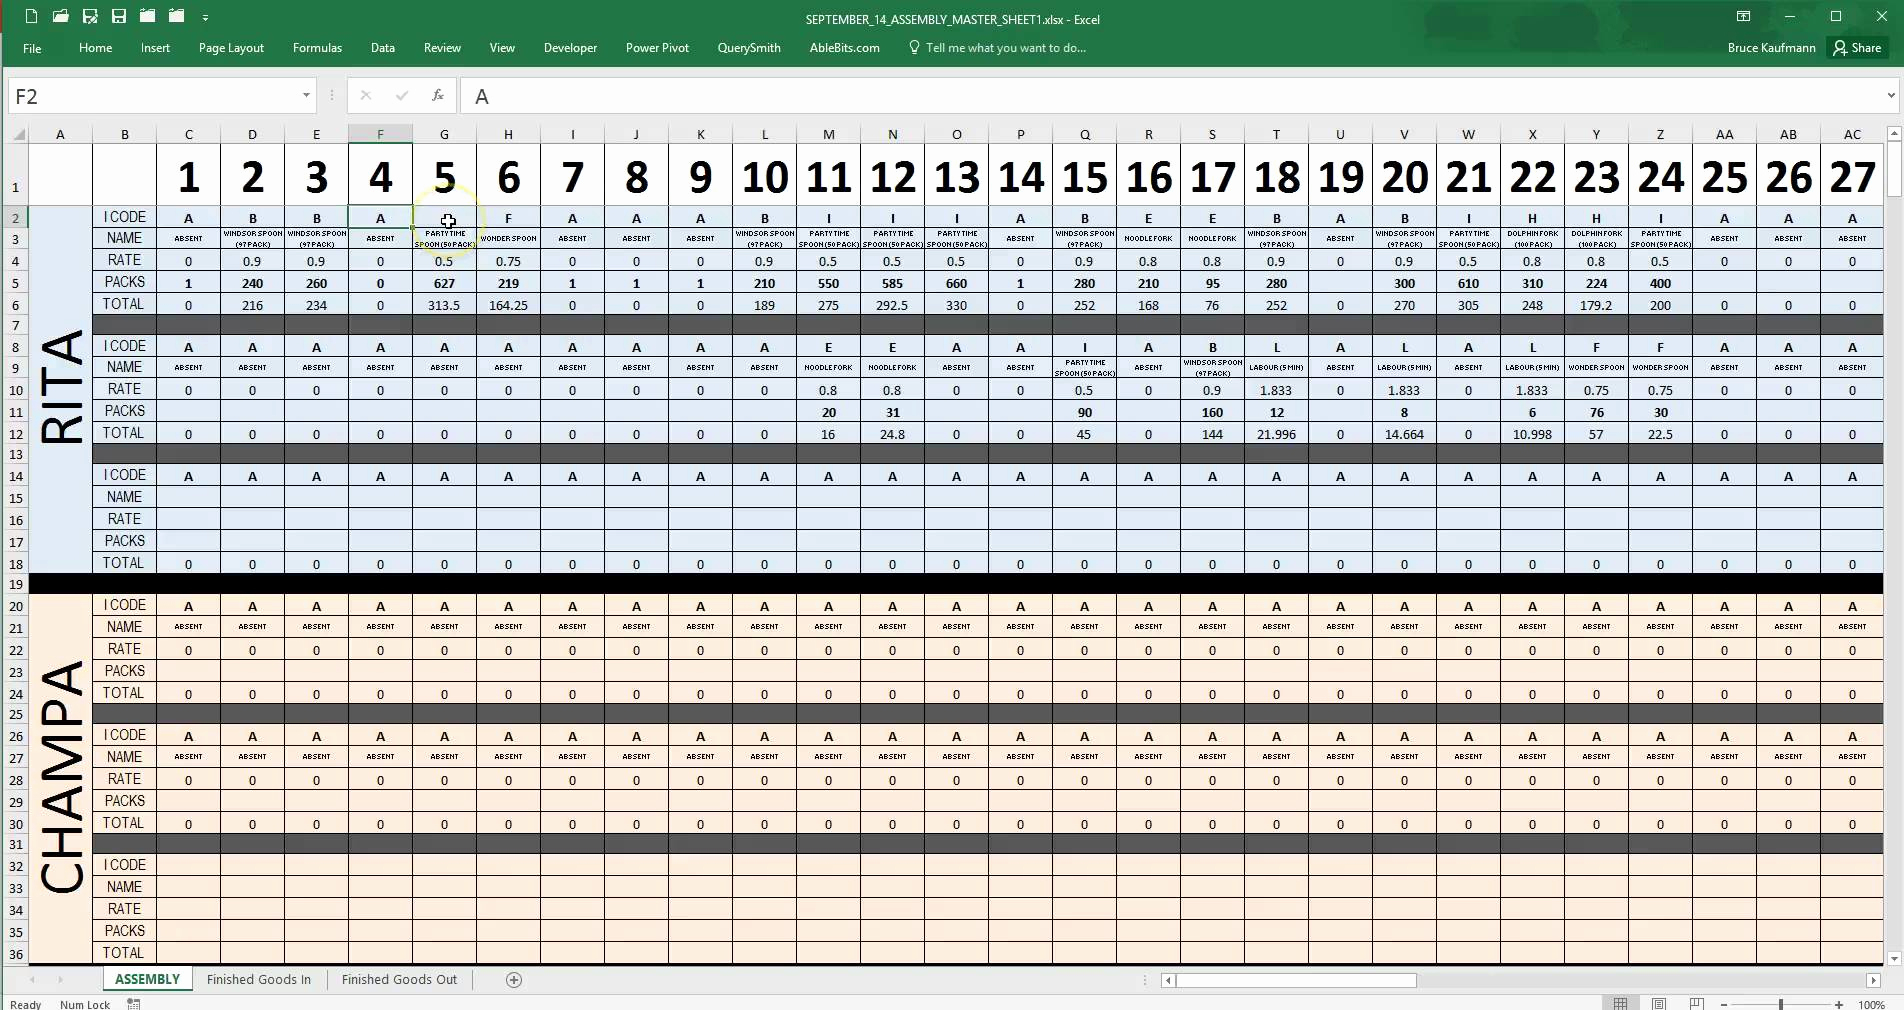 Production Capacity Planning Template In Excel Spreadsheet Intended For Capacity Planning Template In Excel Spreadsheet Inspirational